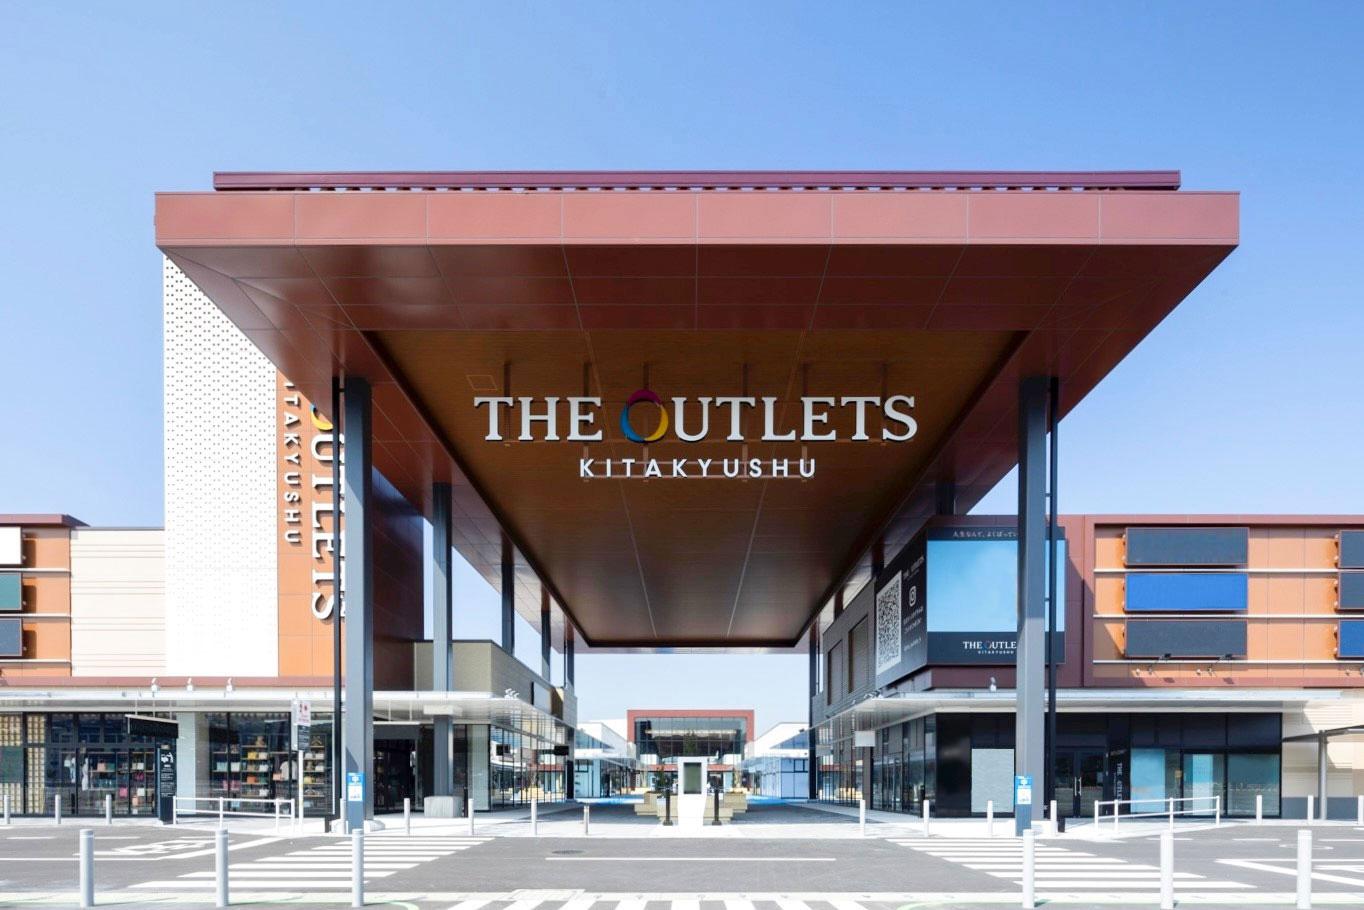 THE OUTLETS KITAKYUSHU  －ジ・アウトレット北九州ー-0